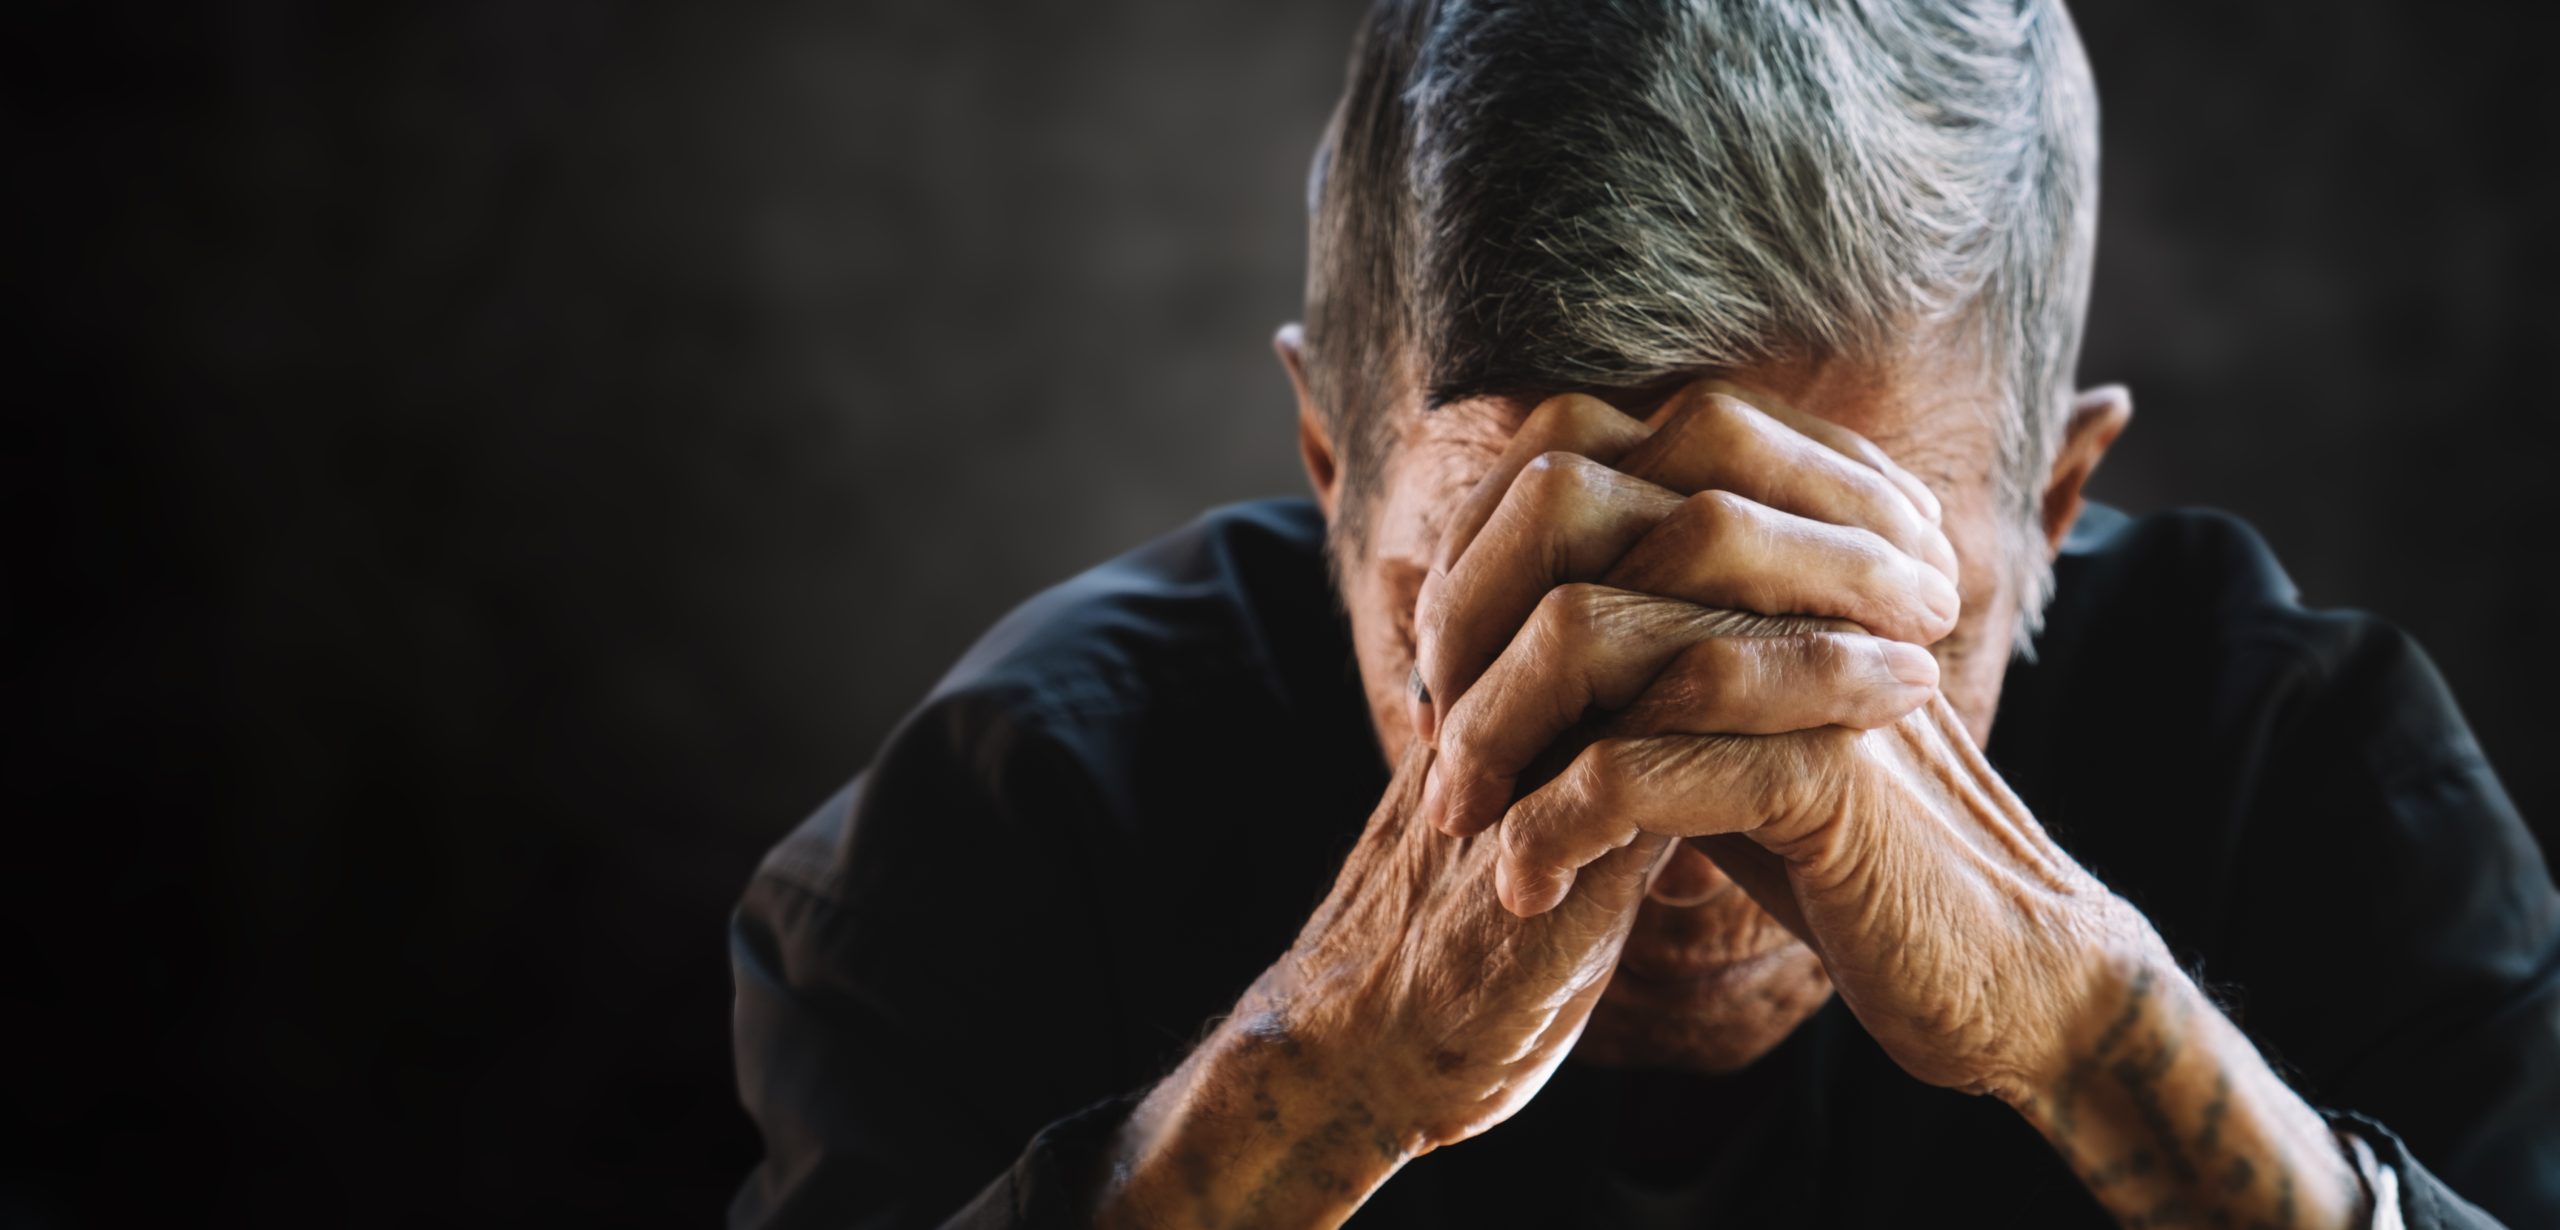 Suffering in Silence: Two-Thirds of Older Adults Say They Won't Treat Their  Depression